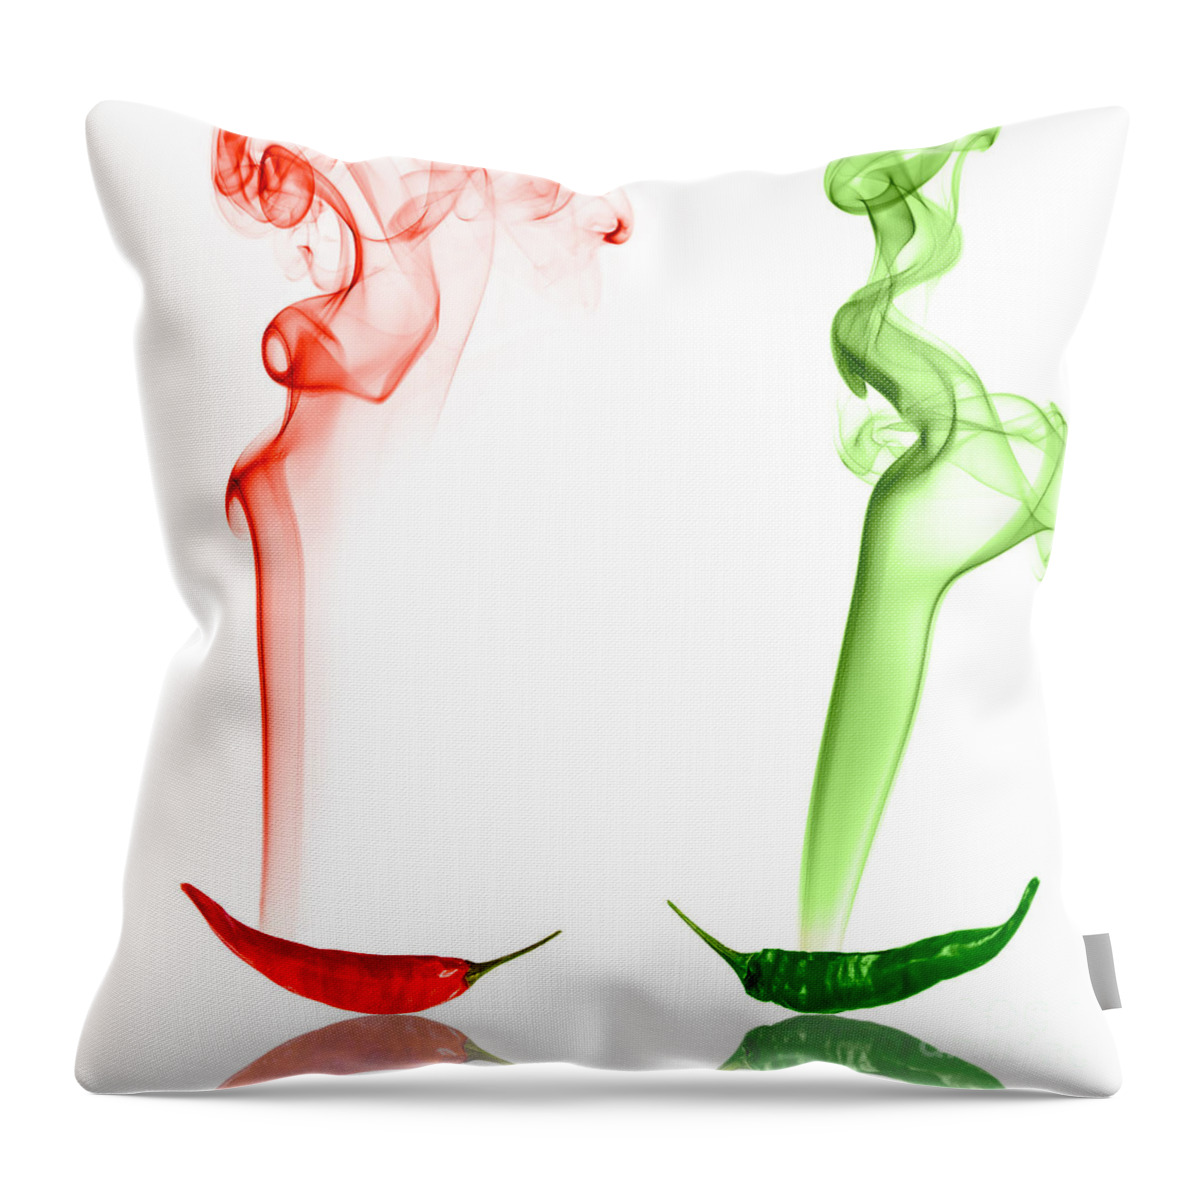 Smoke Photography Throw Pillow featuring the photograph Red and Green Chili Smoke Photography by Sabine Jacobs